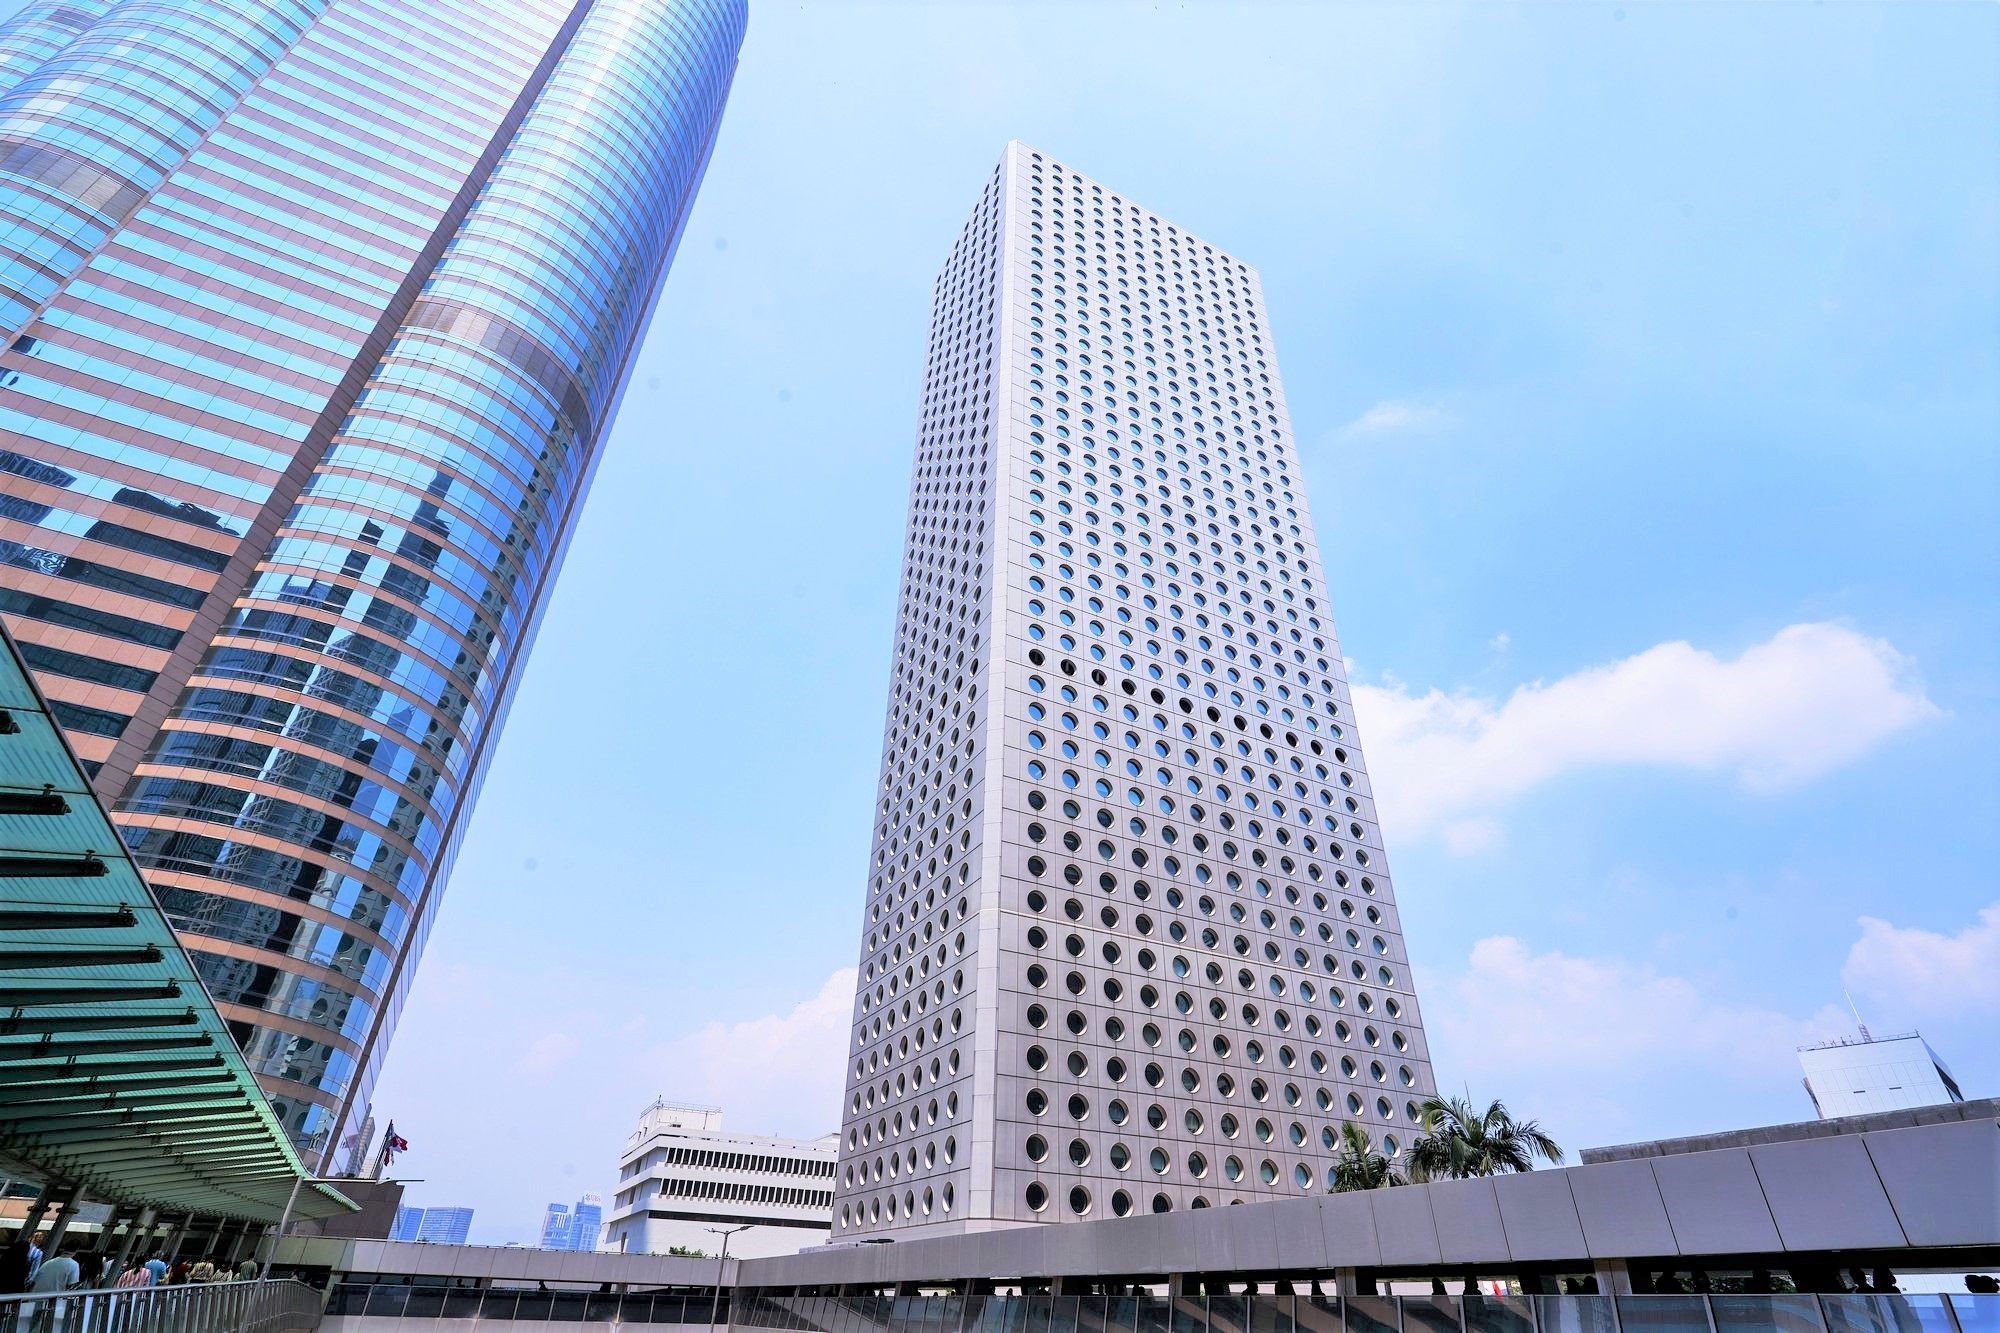 Jardine House is a prominent part of the renowned Hong Kong skyline with its distinctive architectural features.